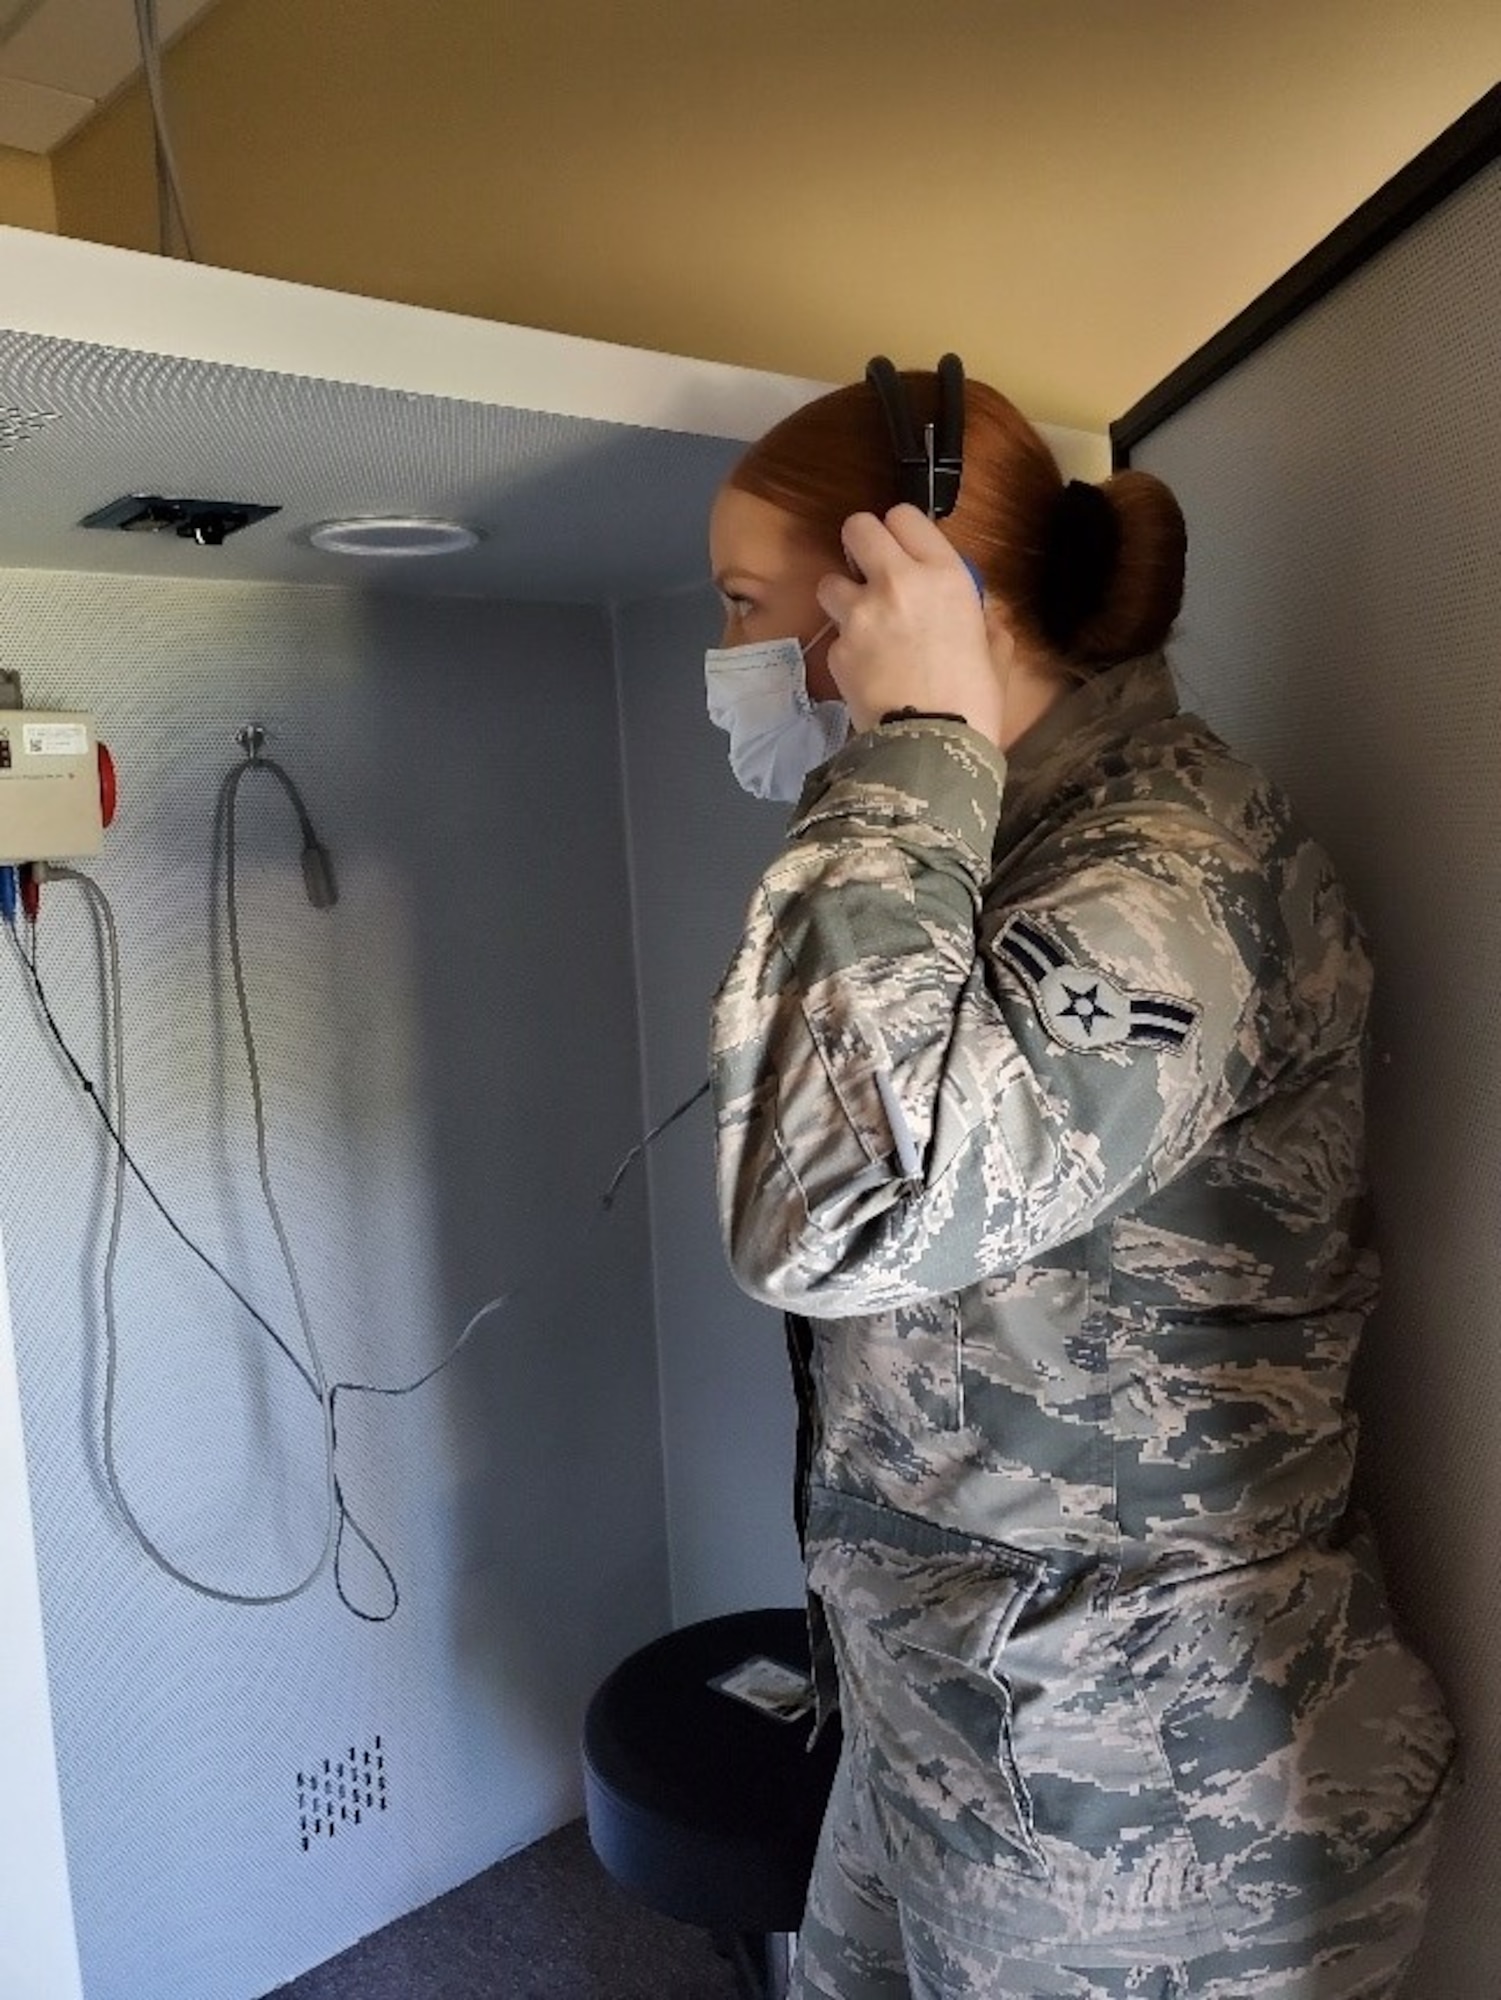 Airman 1st Class Sidney McDonough, a public health technician with the 6th Medical Group, ensures that hearing testing equipment is functioning properly before administering an audiogram. (U.S. Air Force photo)